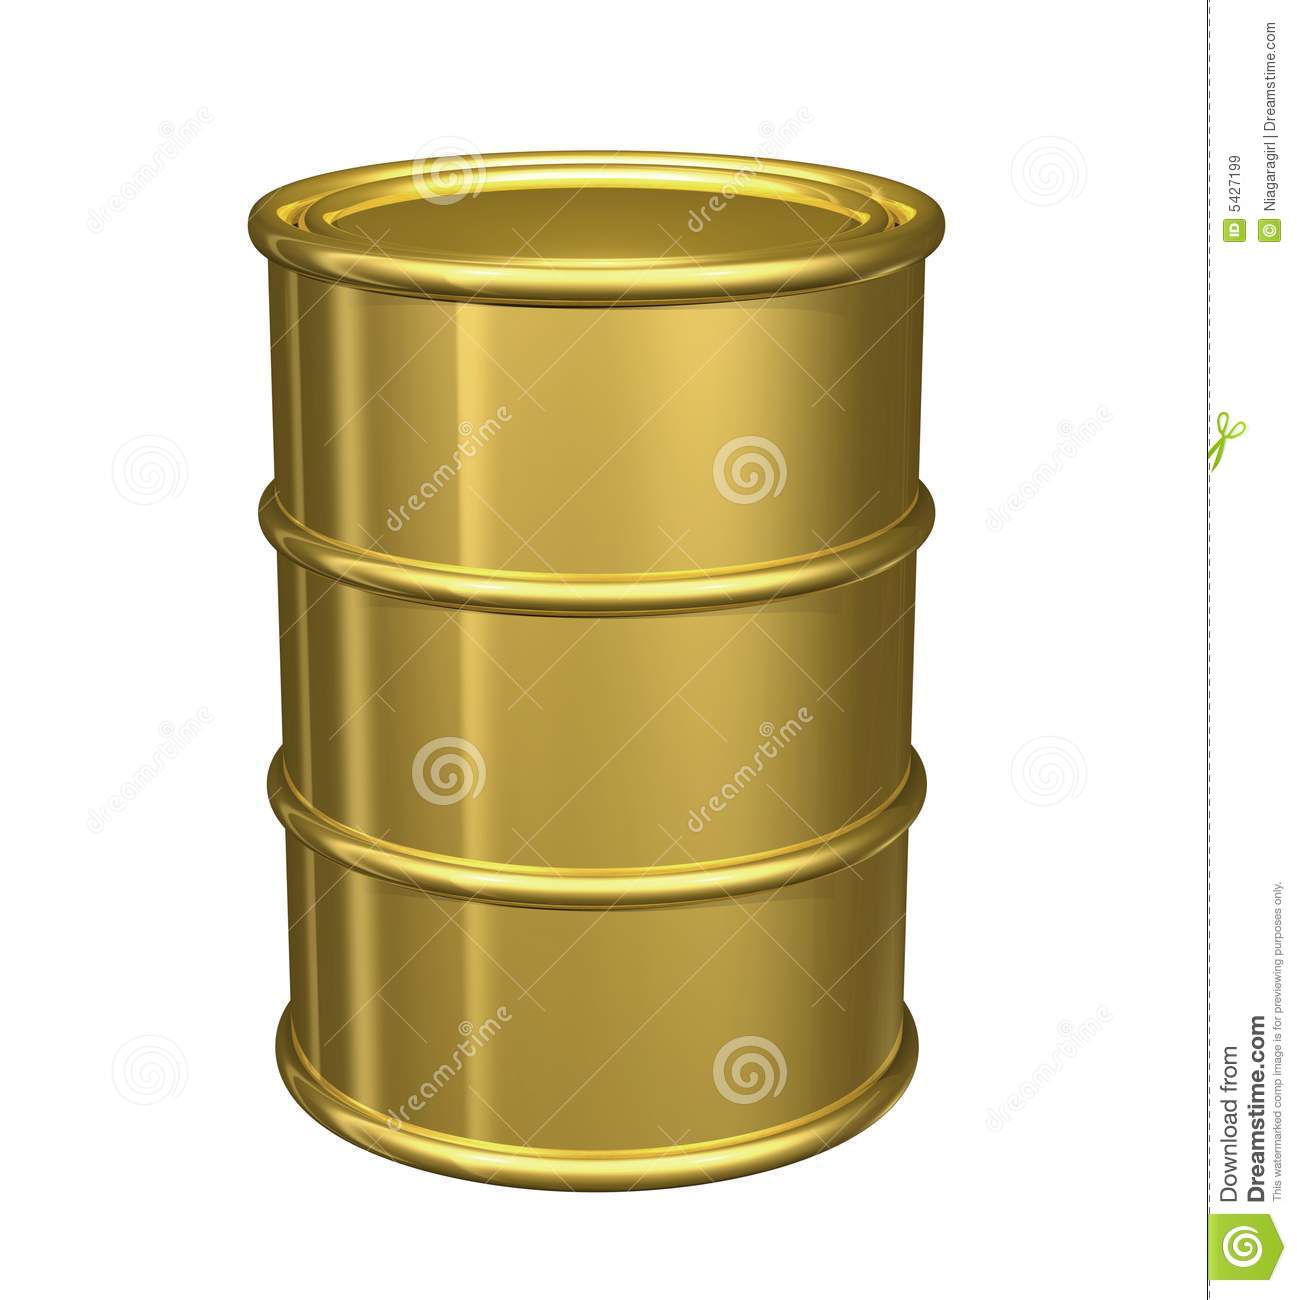 Oil Barrel Clipart Gold Oil Barrel With Clipping